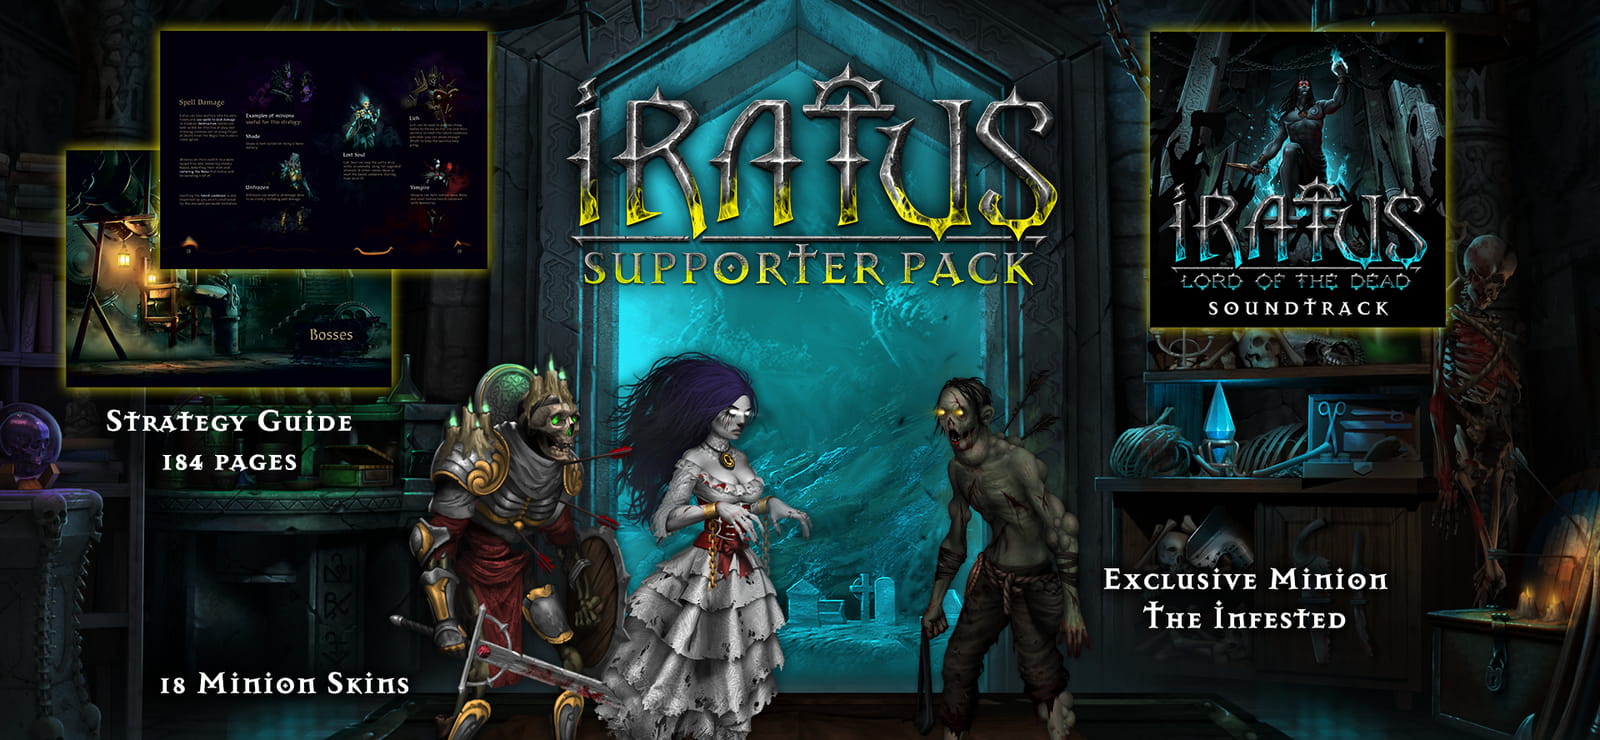 Iratus: Lord Of The Dead - Supporter Pack